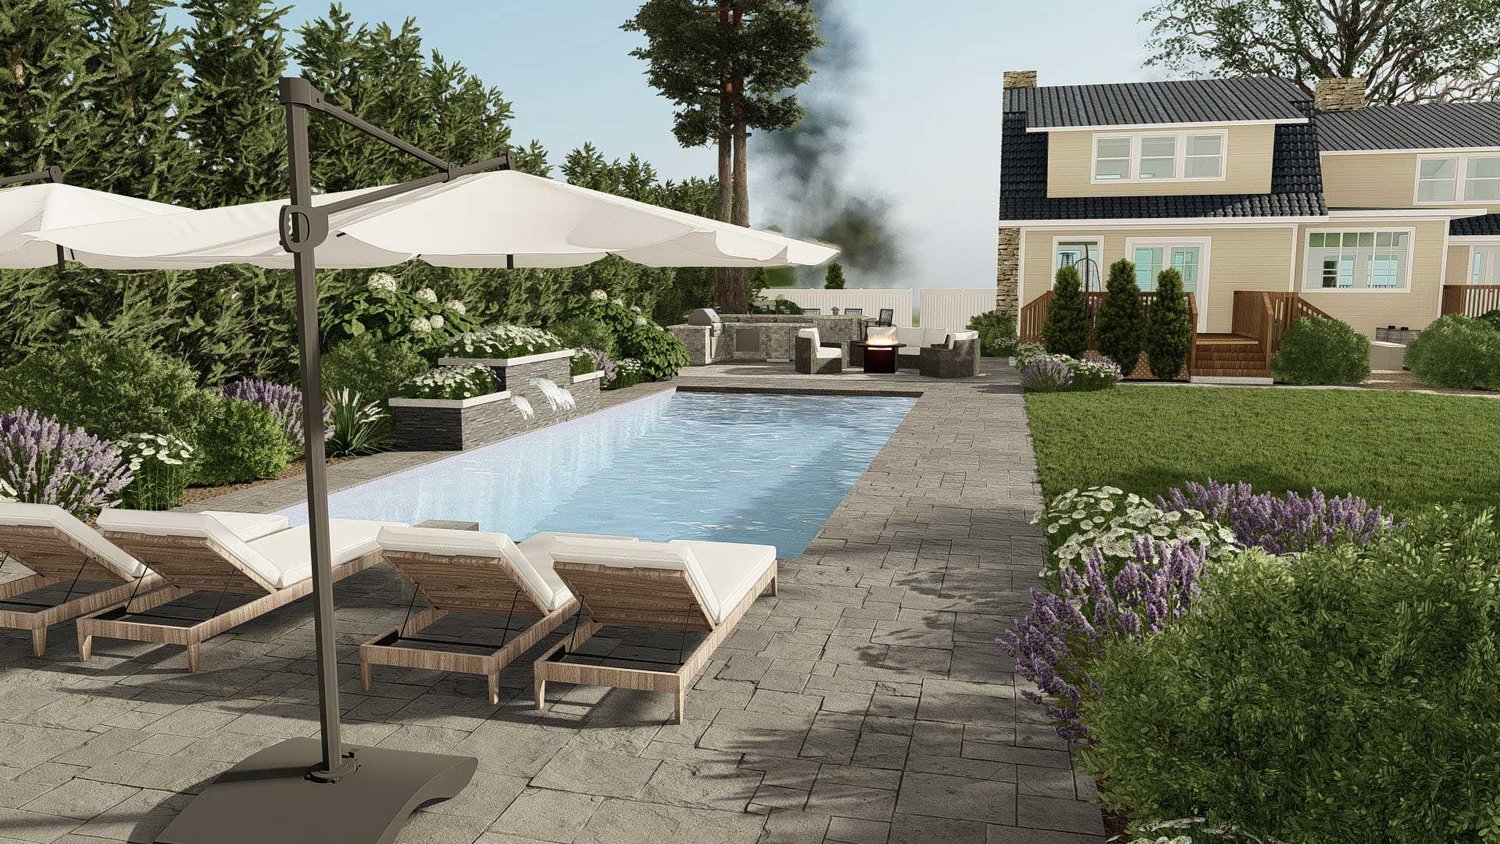 Ocean City in-ground pool with concrete paver deck and sun lounging area in a backyard garden